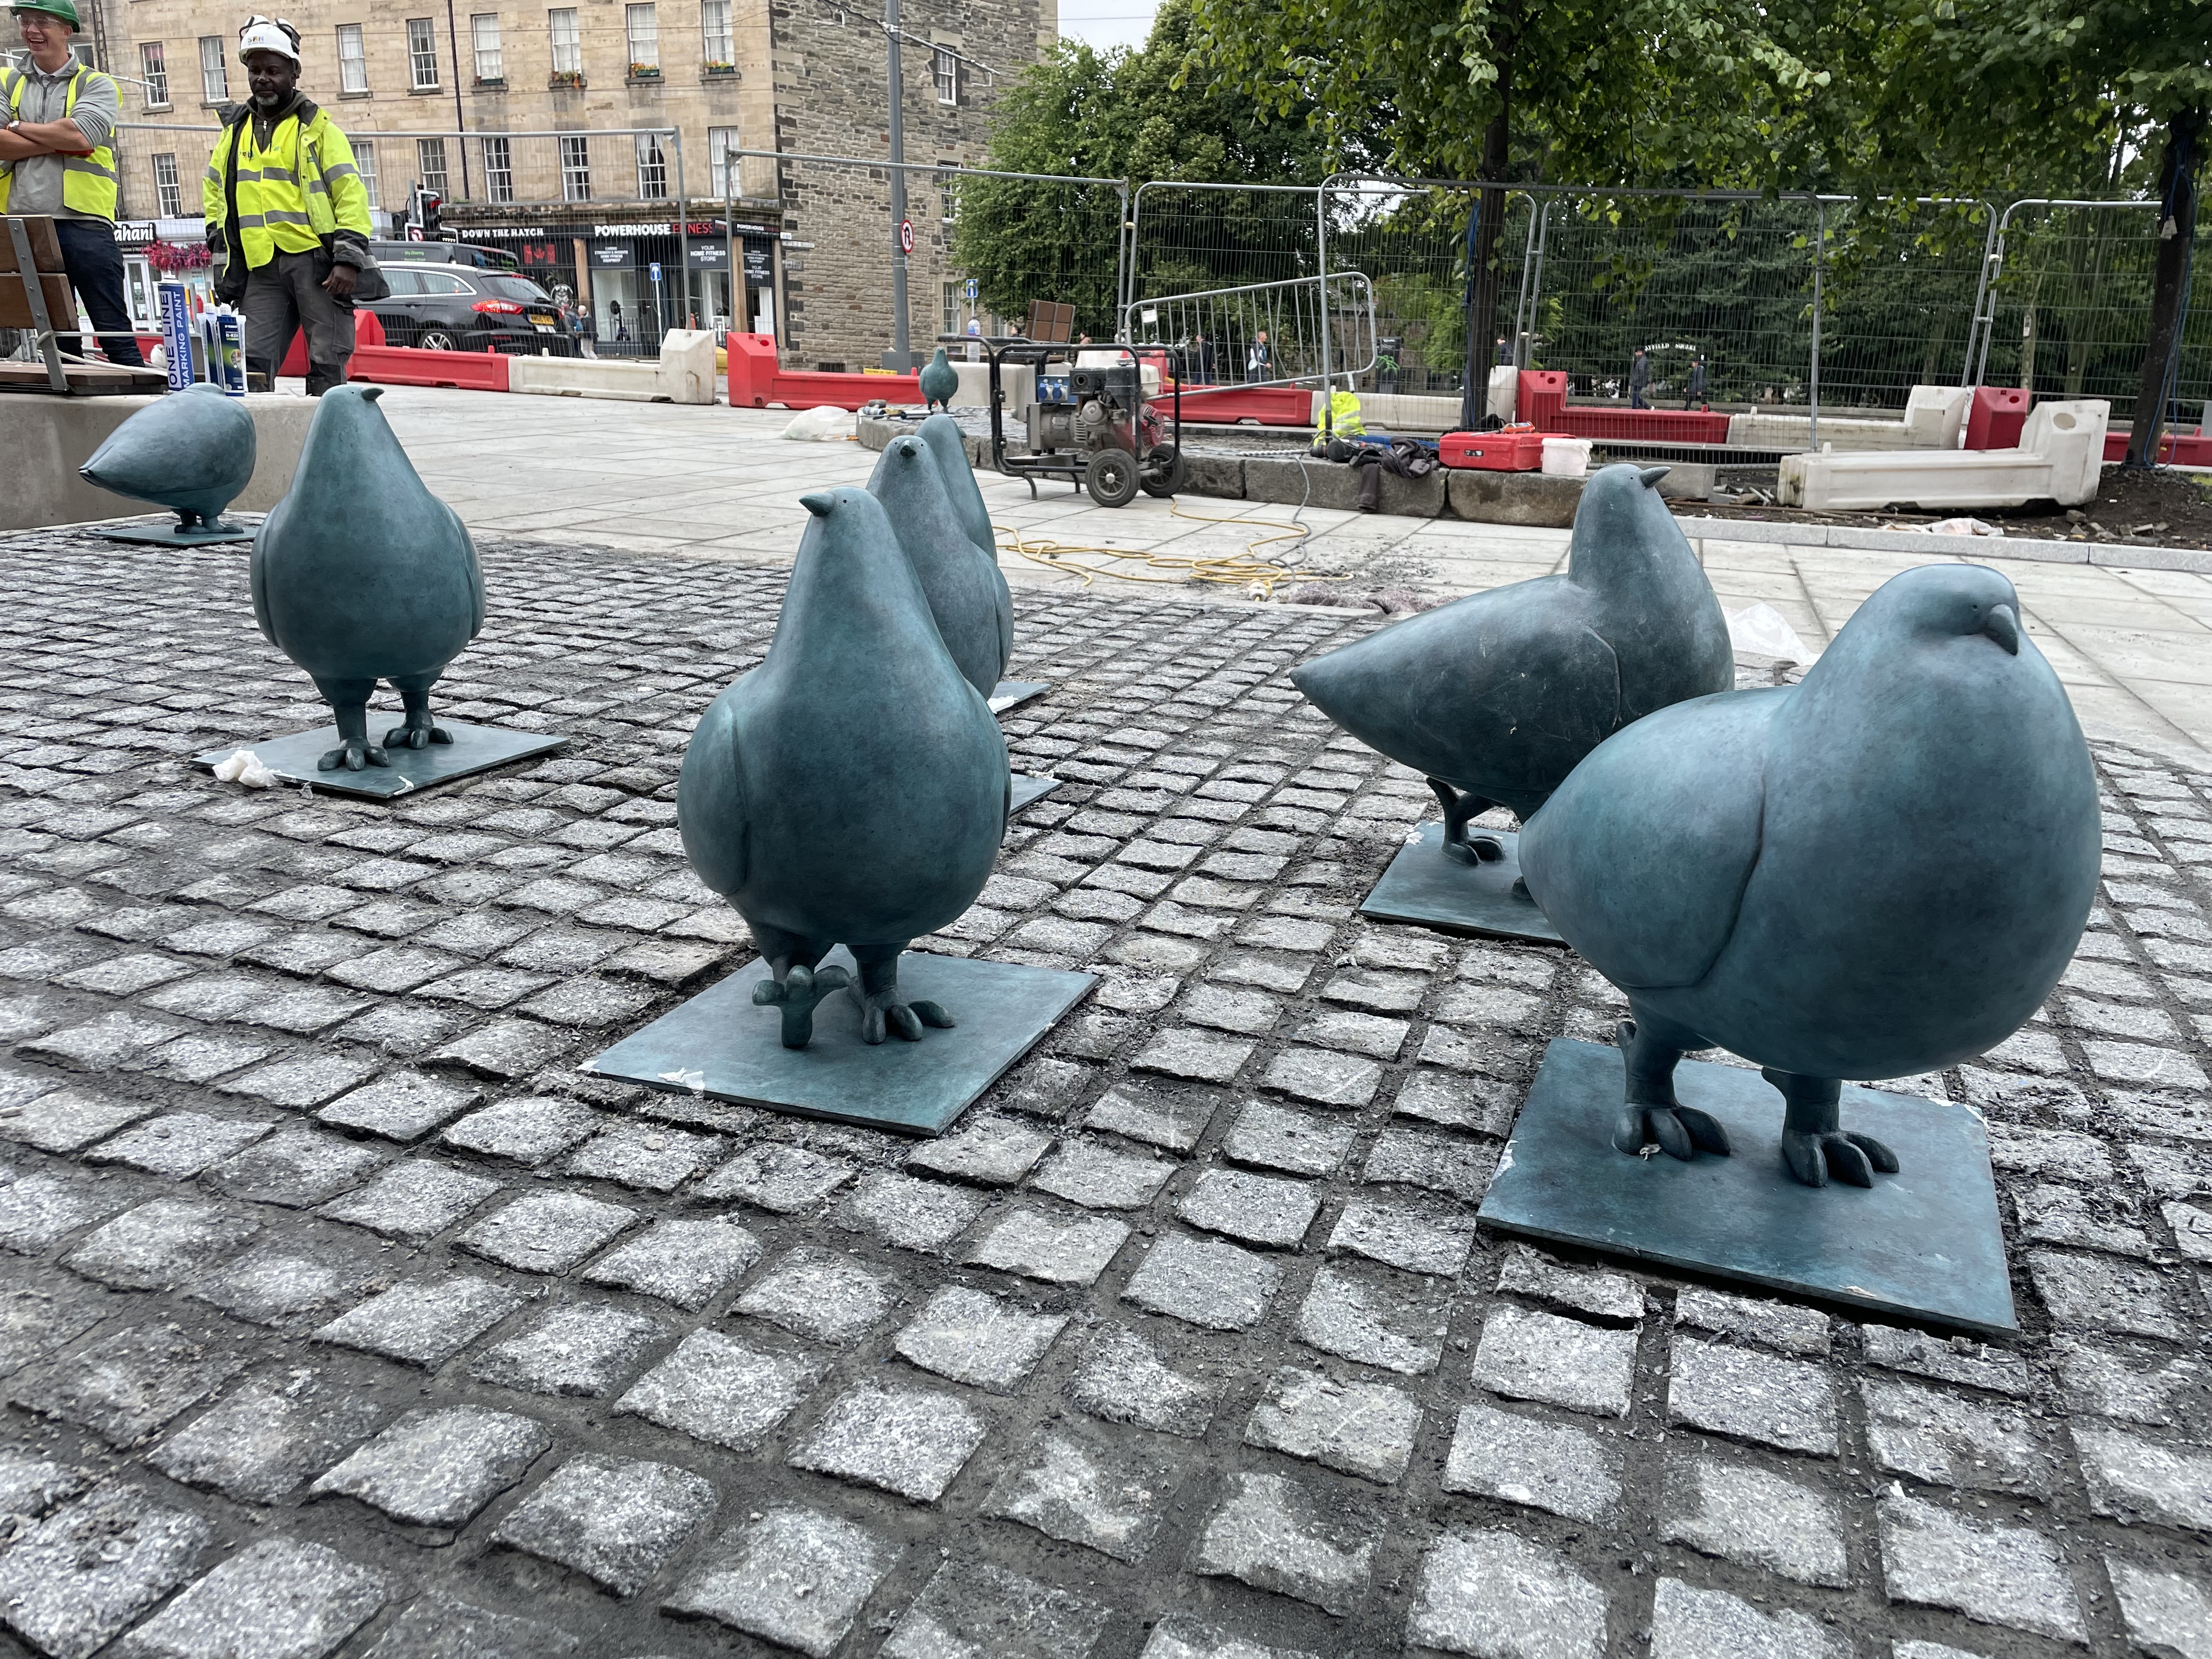 And finally... Elm Row pigeons fly home for good